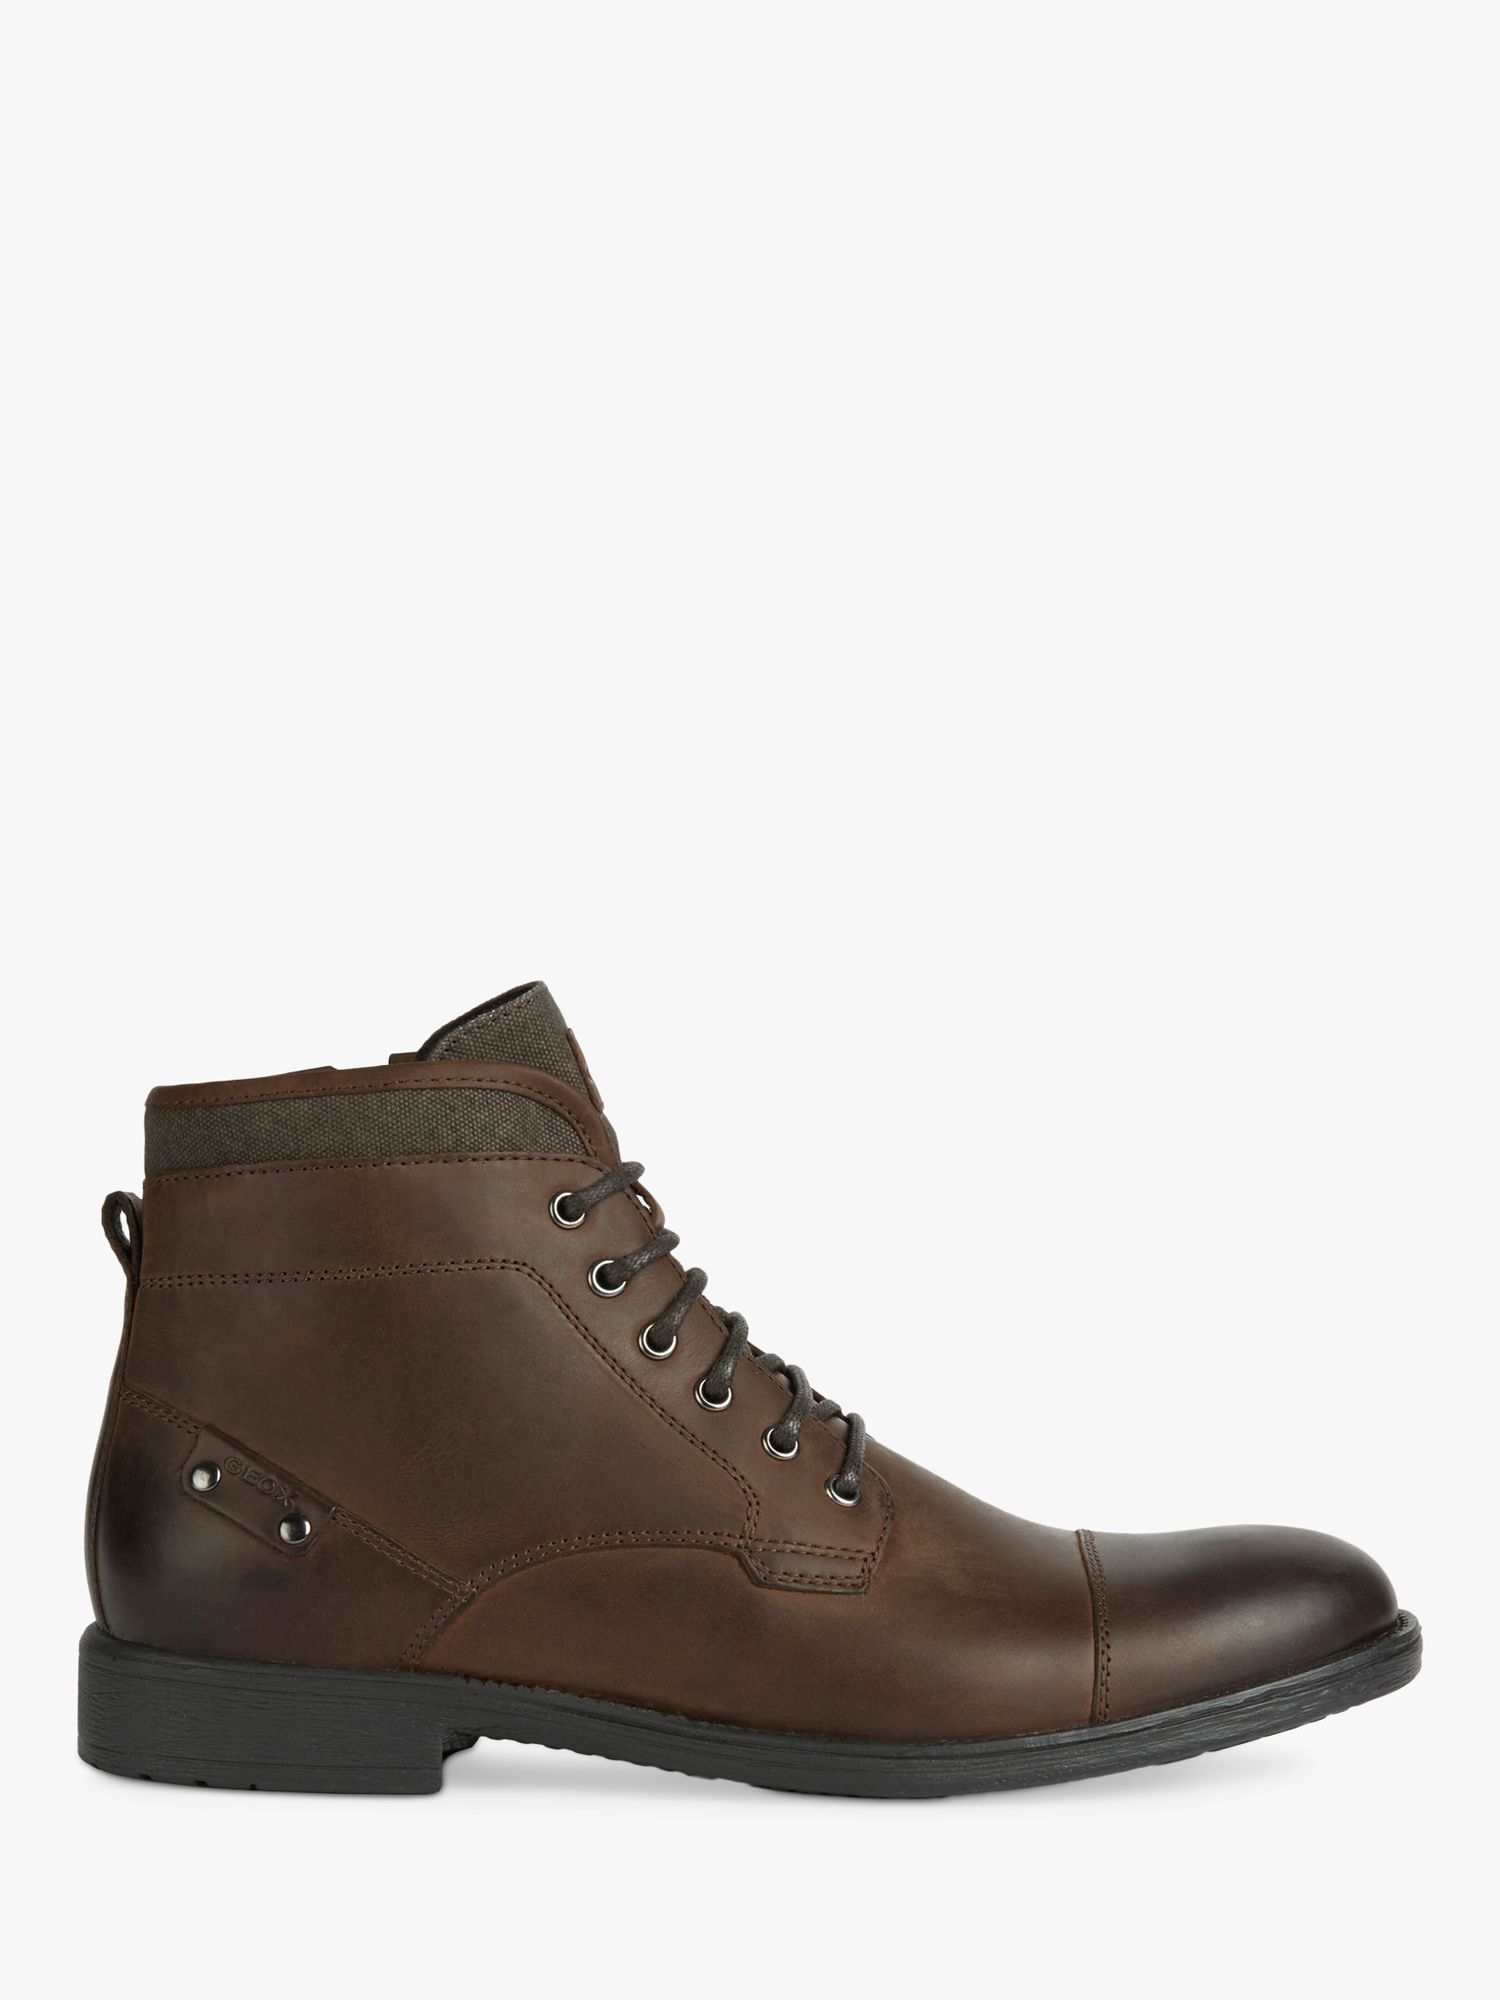 Geox Jaylon Leather Up Ankle Boots, Dark Brown at John Lewis & Partners